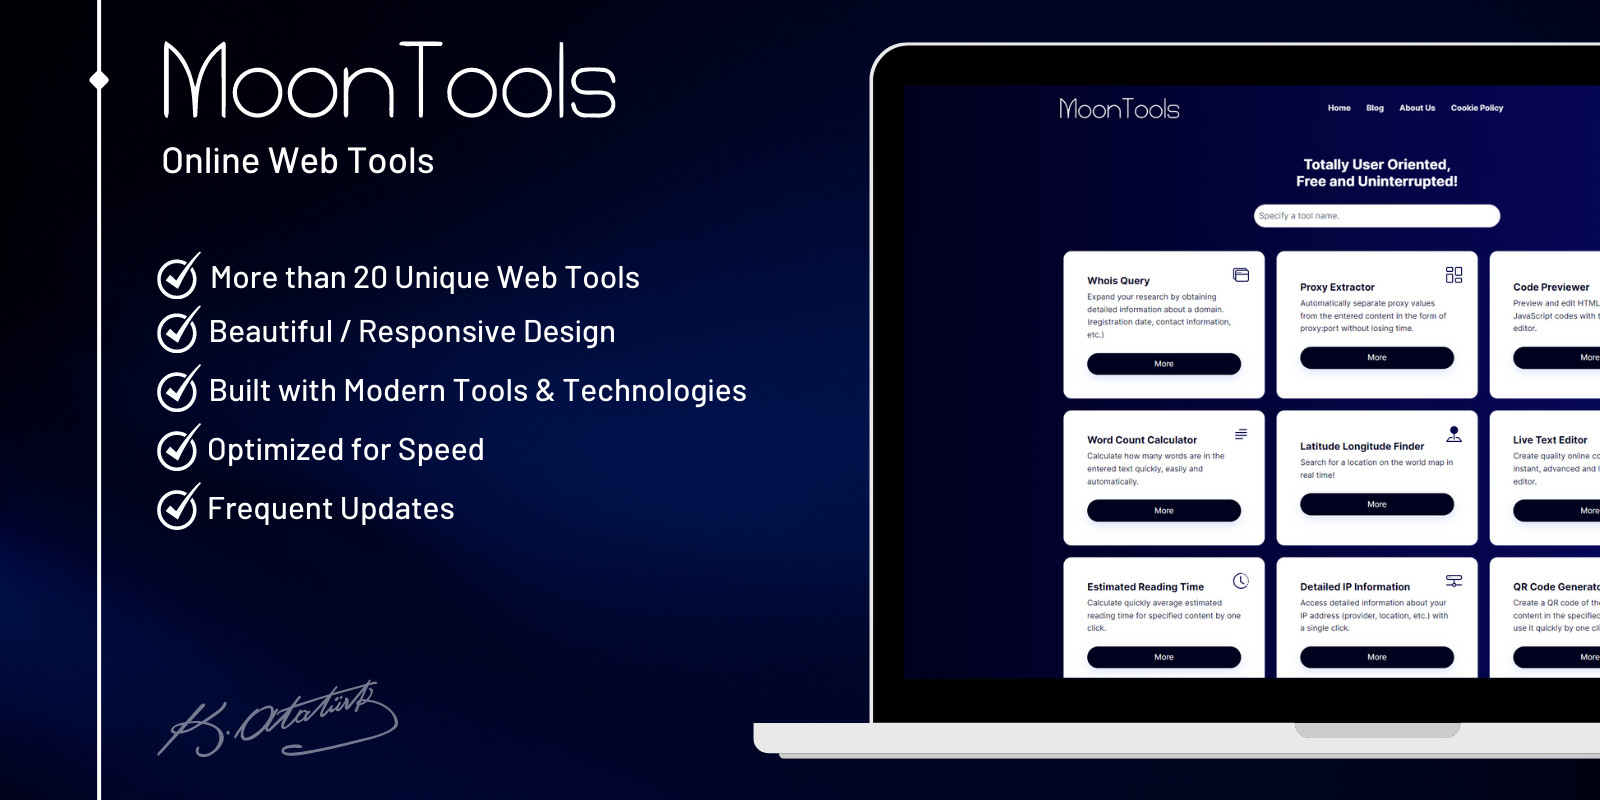 More information about "MoonTools - Online Web Tools"